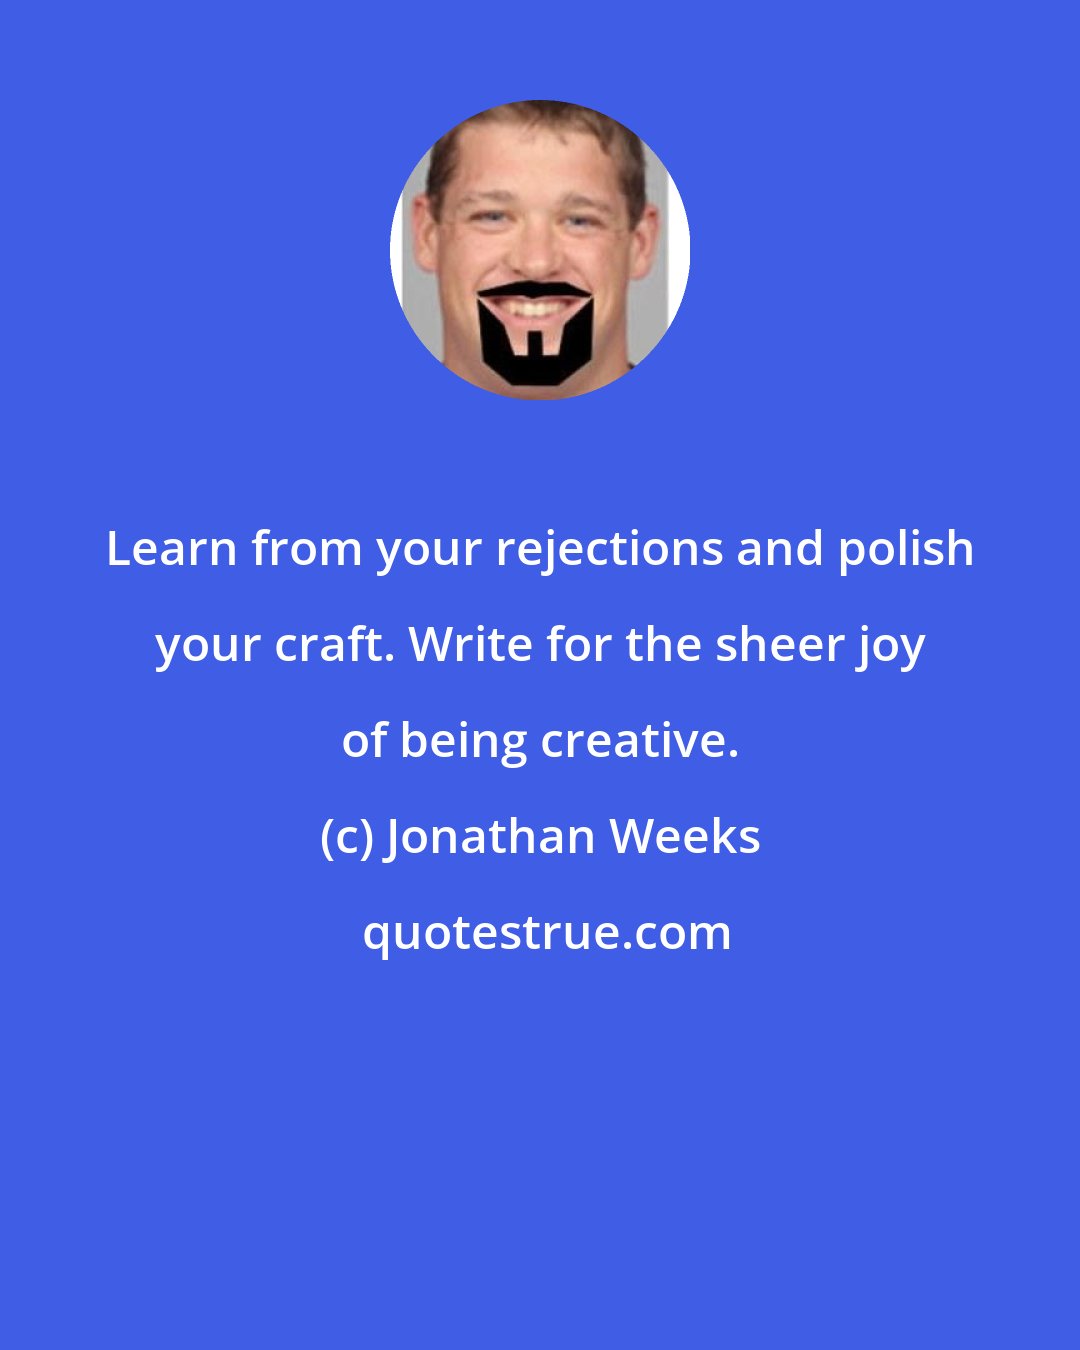 Jonathan Weeks: Learn from your rejections and polish your craft. Write for the sheer joy of being creative.